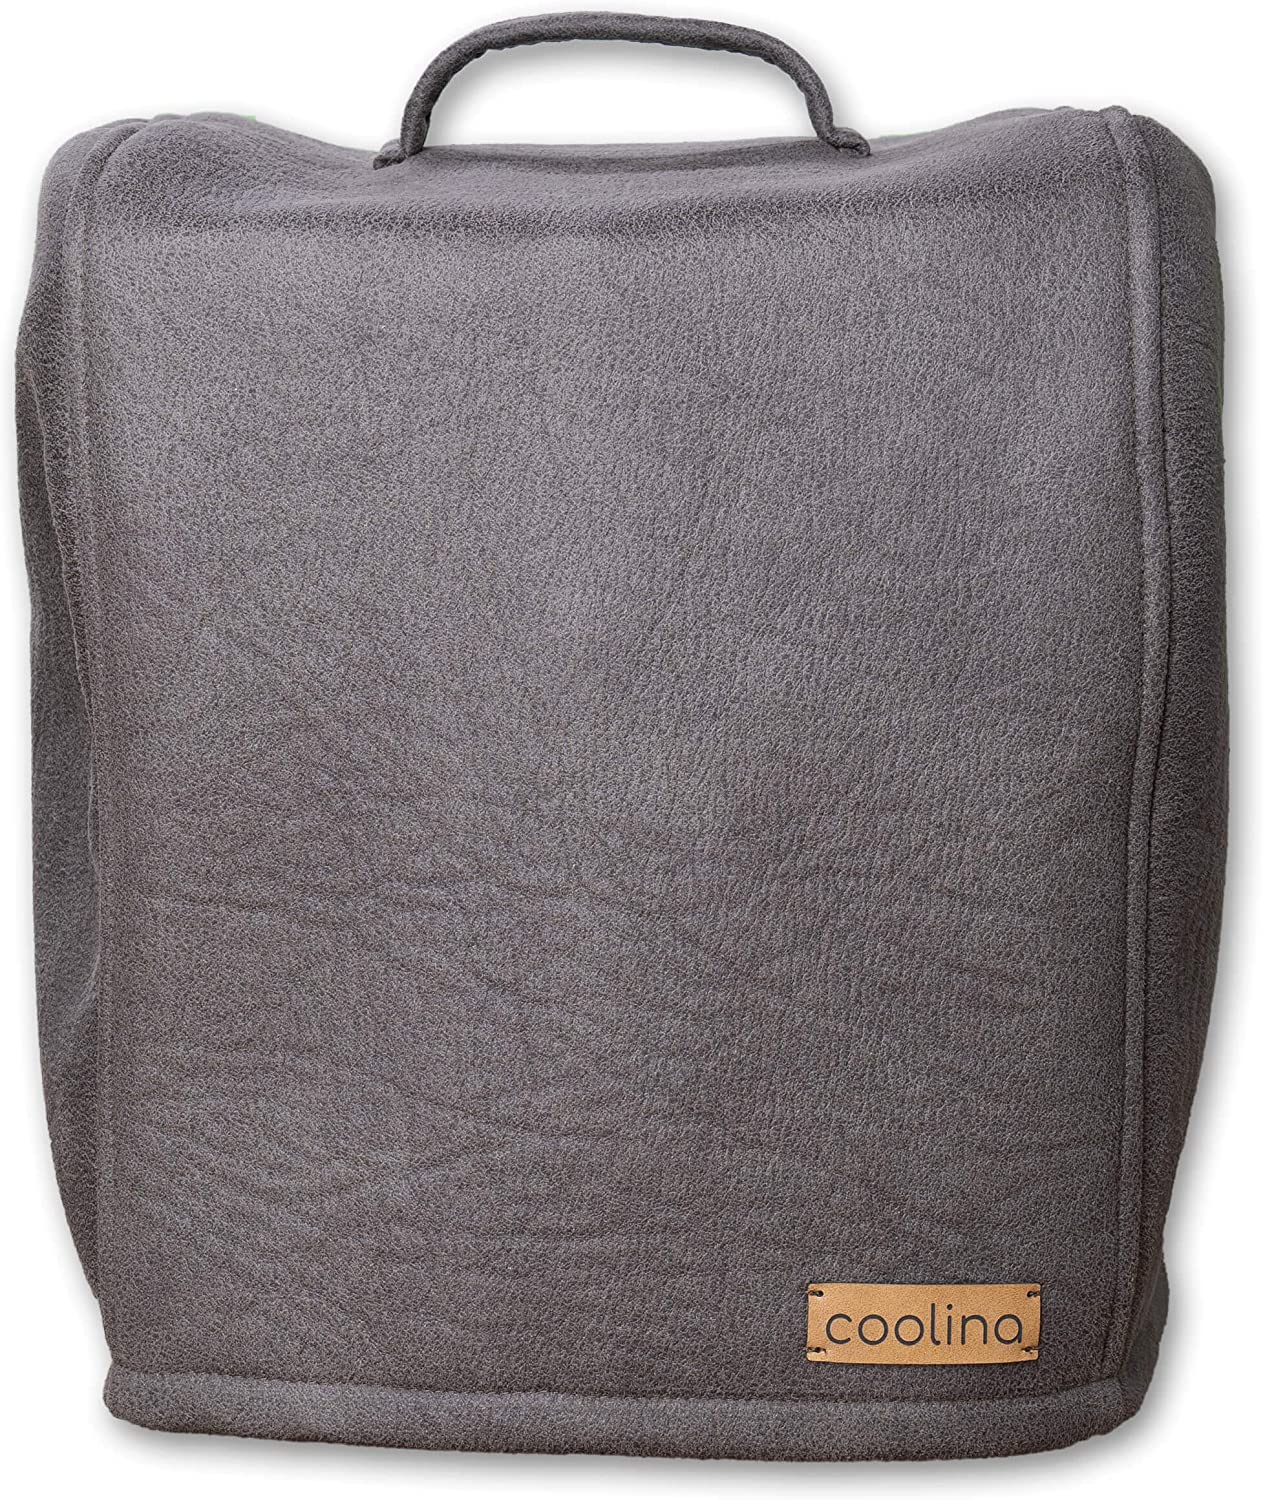 Cover for TM5 & TM6 coolina Premium Protective Case for Thermomix 